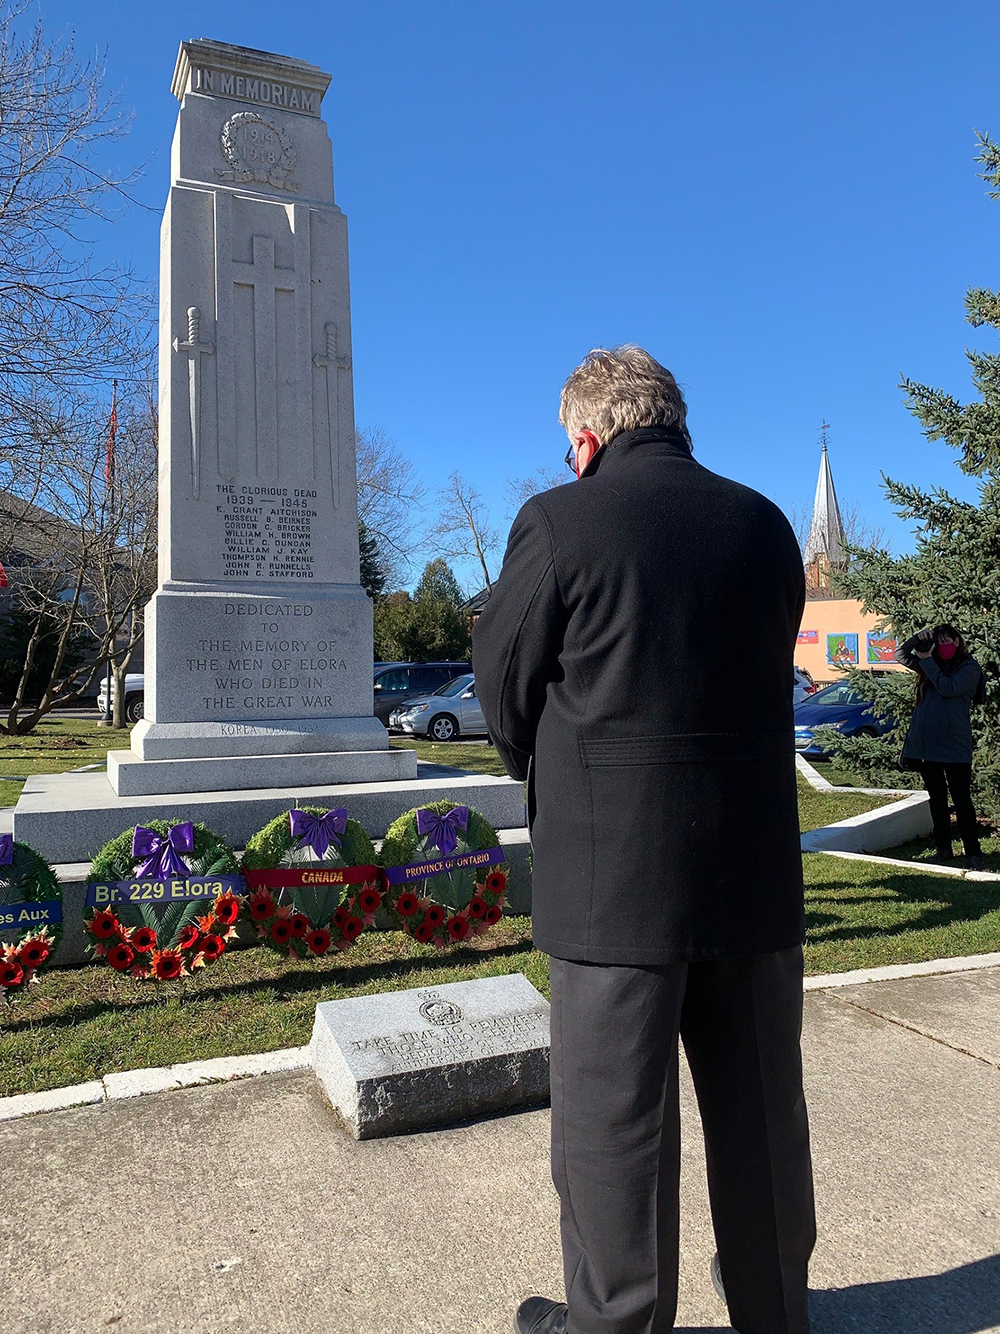 Wednesday, November 11, 2020 – Senator Robert Black commemorates Remembrance Day in Wellington County at the cenotaph in Elora, Ontario.